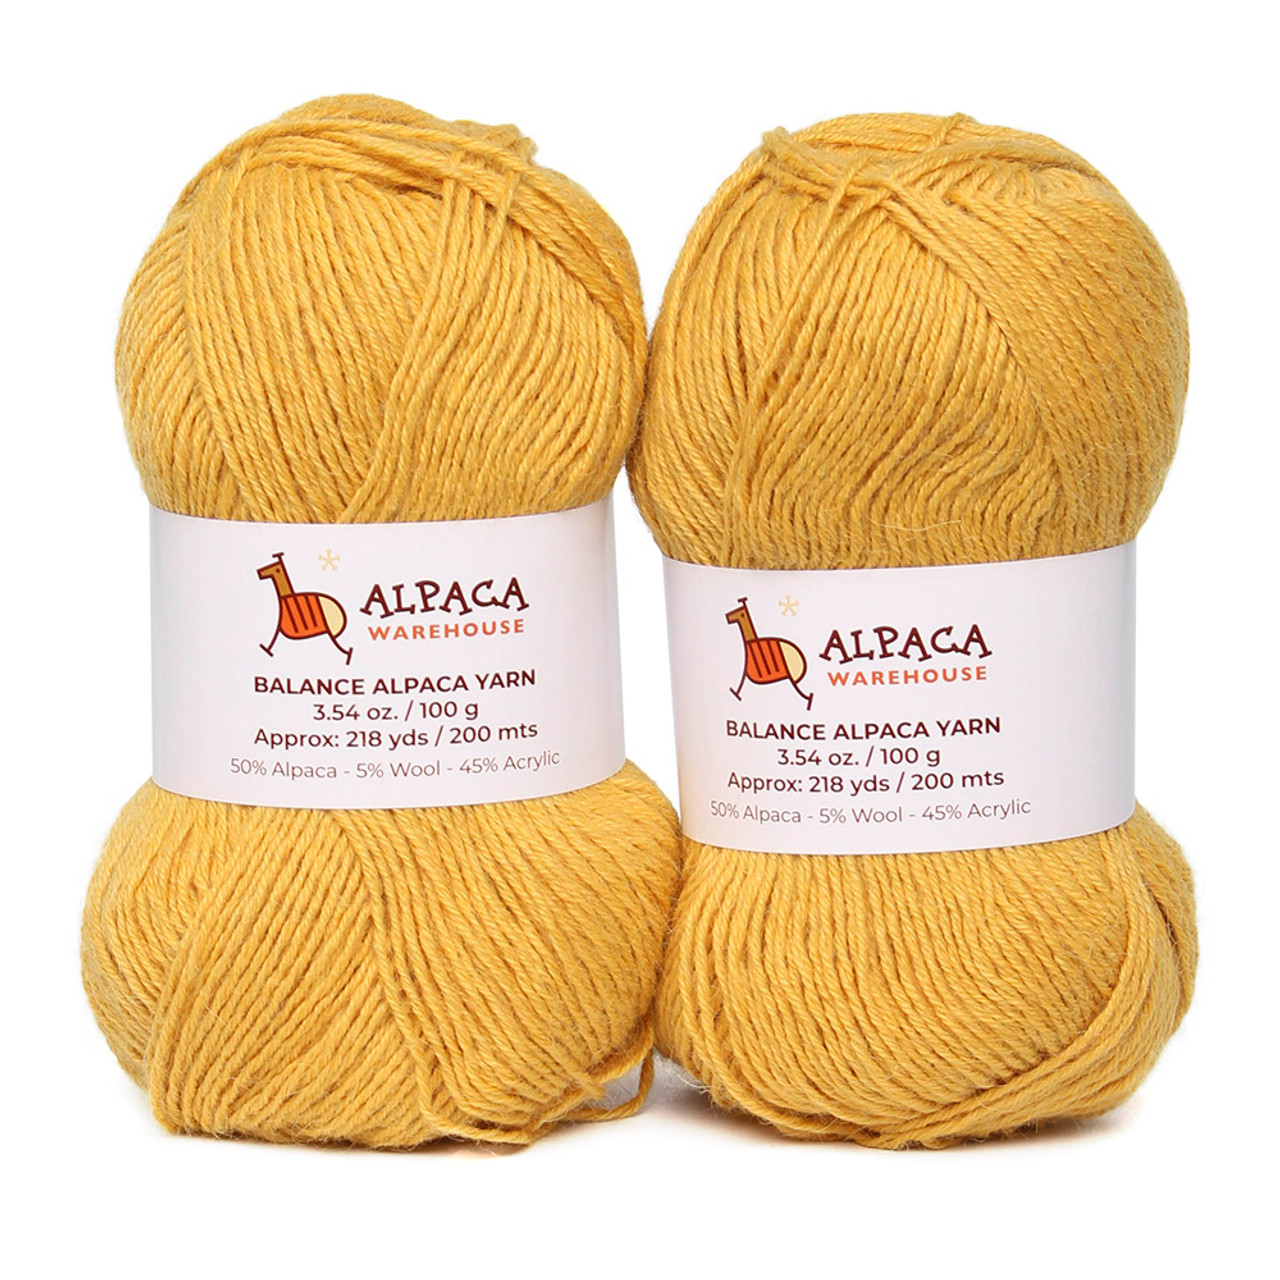 Blend Alpaca Yarn Wool 2 Skeins 200 Grams DK Weight - Heavenly Soft and  Perfect for Knitting and Crocheting (Navy Blue, DK Weight)